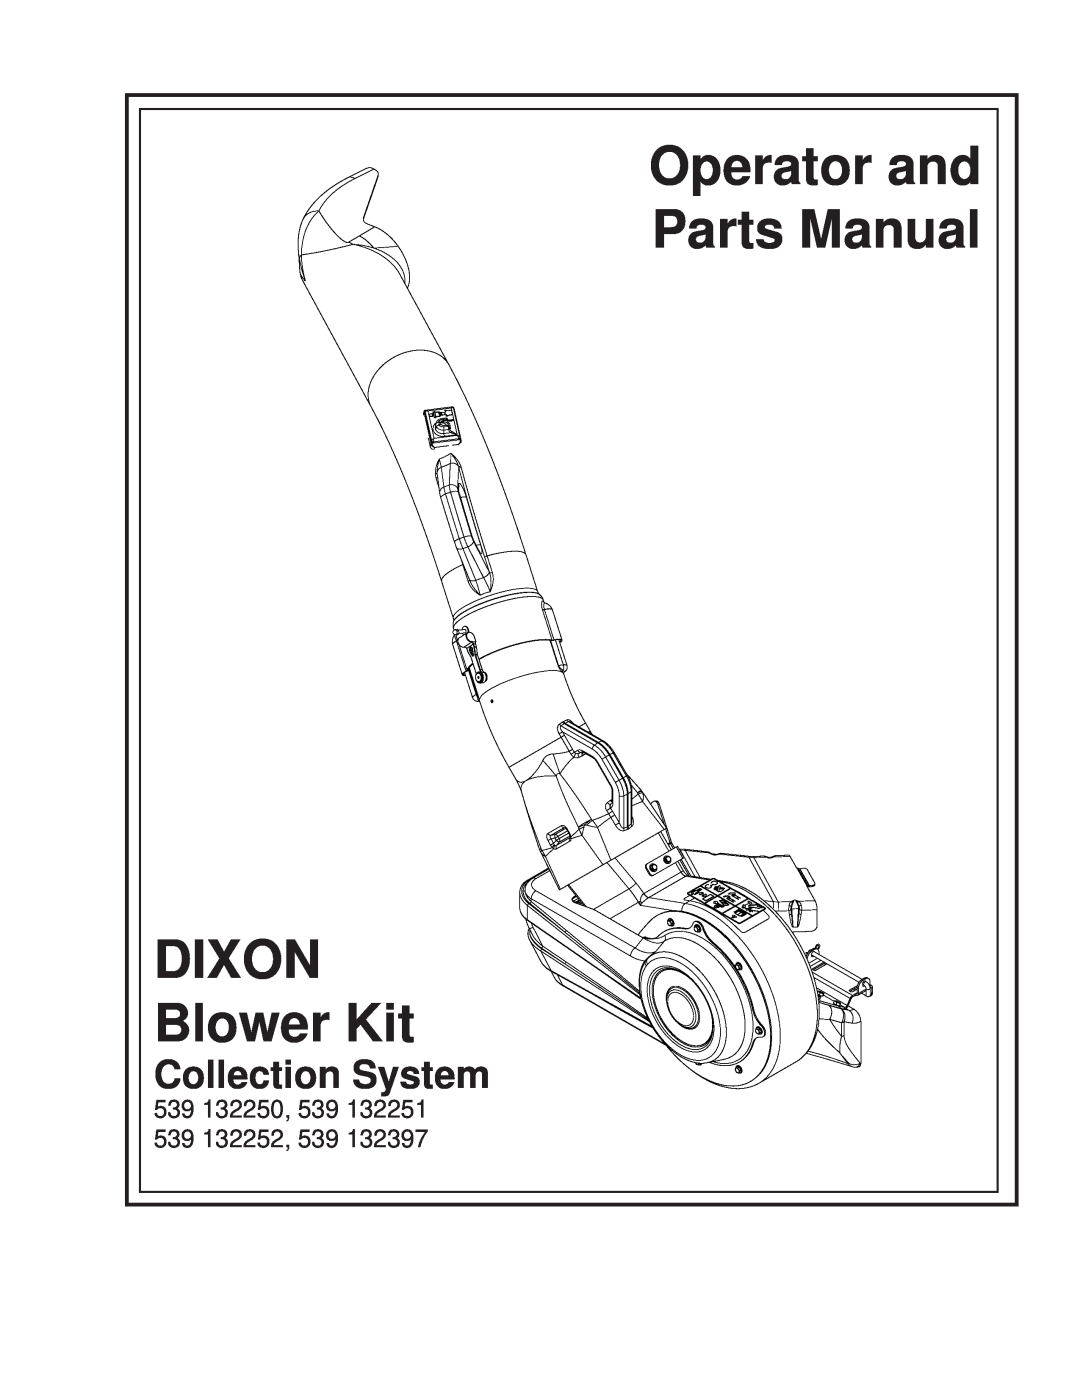 Dixon 539 132252, 539 132397, 539 132250, 539 132251 manual Operator and, Parts Manual, Dixon, Blower Kit, Collection System 